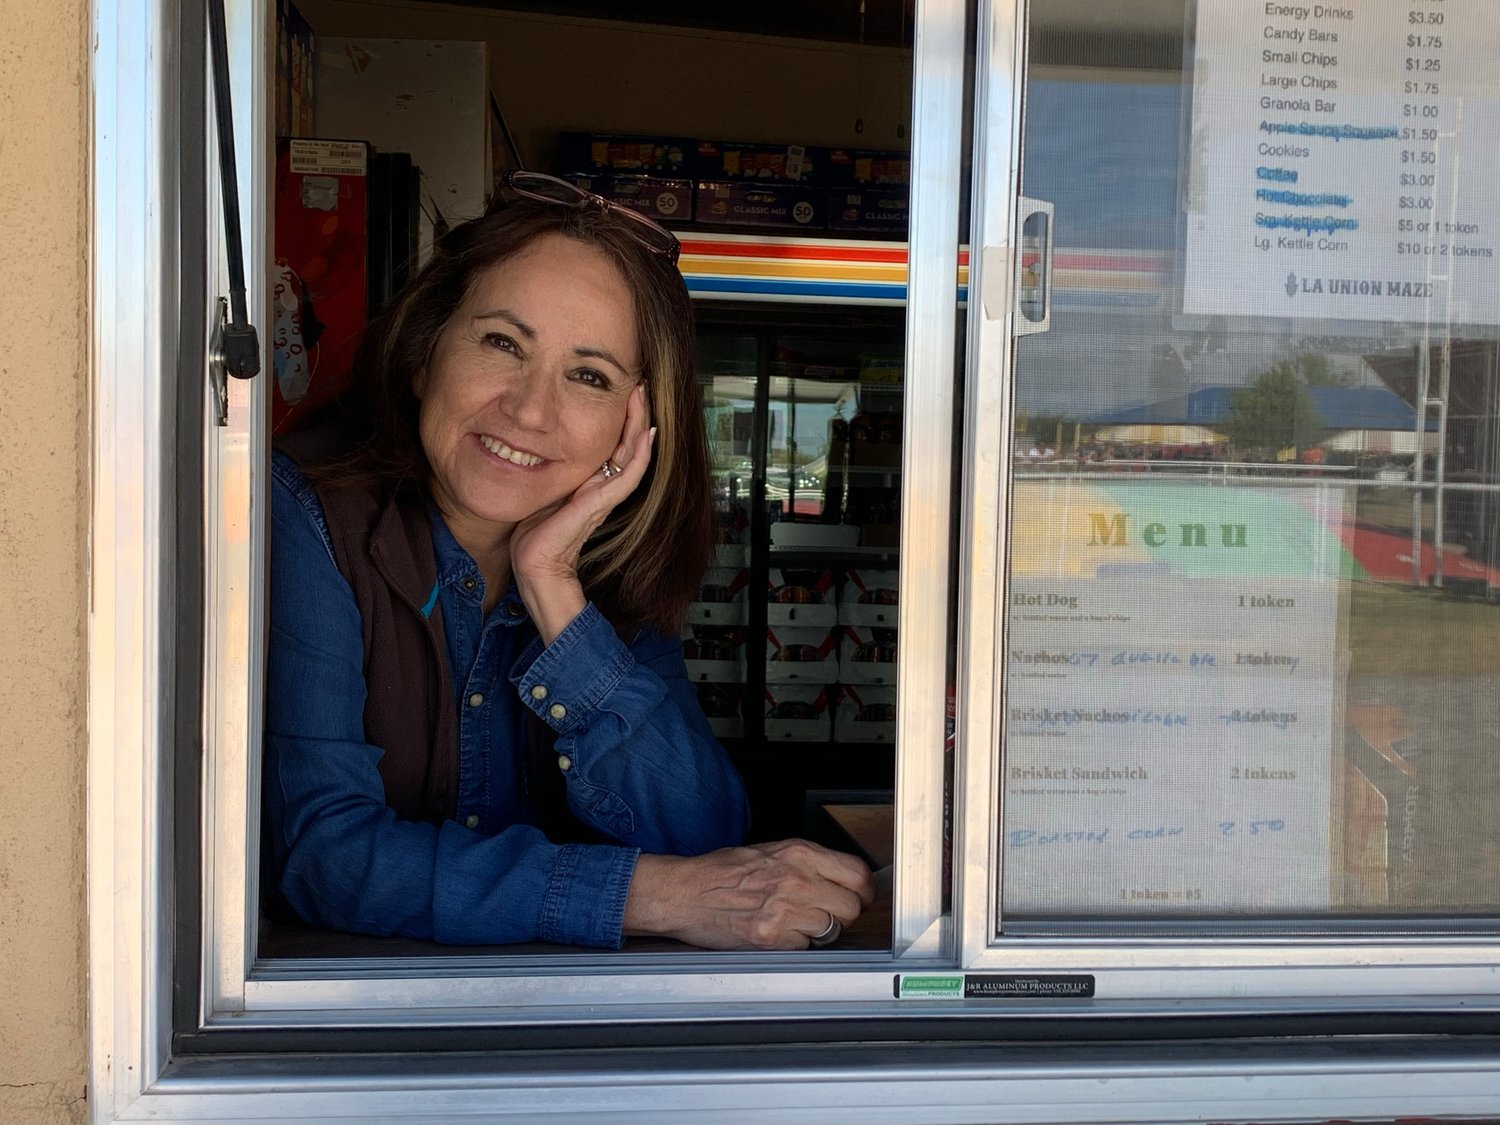 La Union Maze owner Lucy Sondgeroth mans the concessions booth Wednesday, Oct. 13. Among the treats available at the site are fresh corn on the cob and brisket sandwiches.